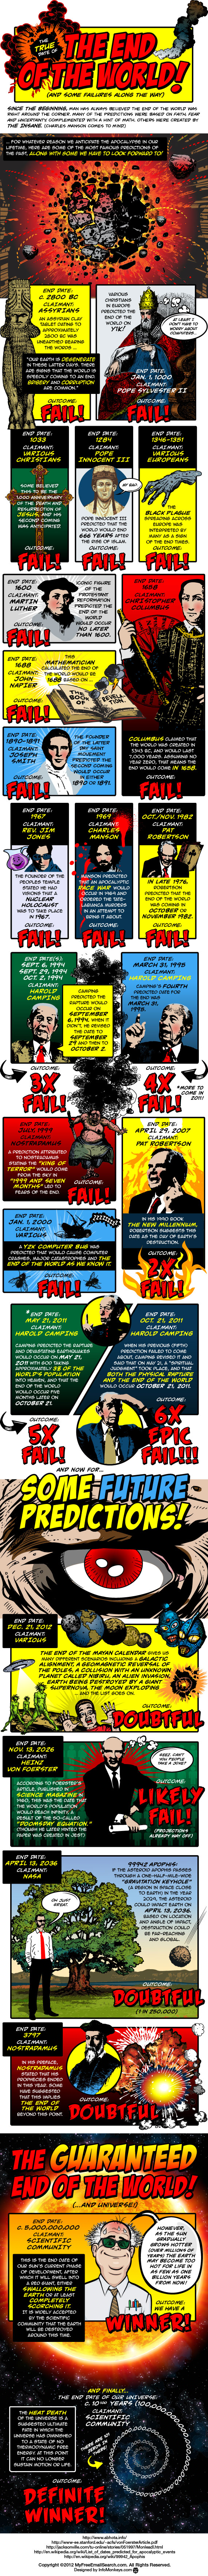 failed-doomsday-predictions-infographic